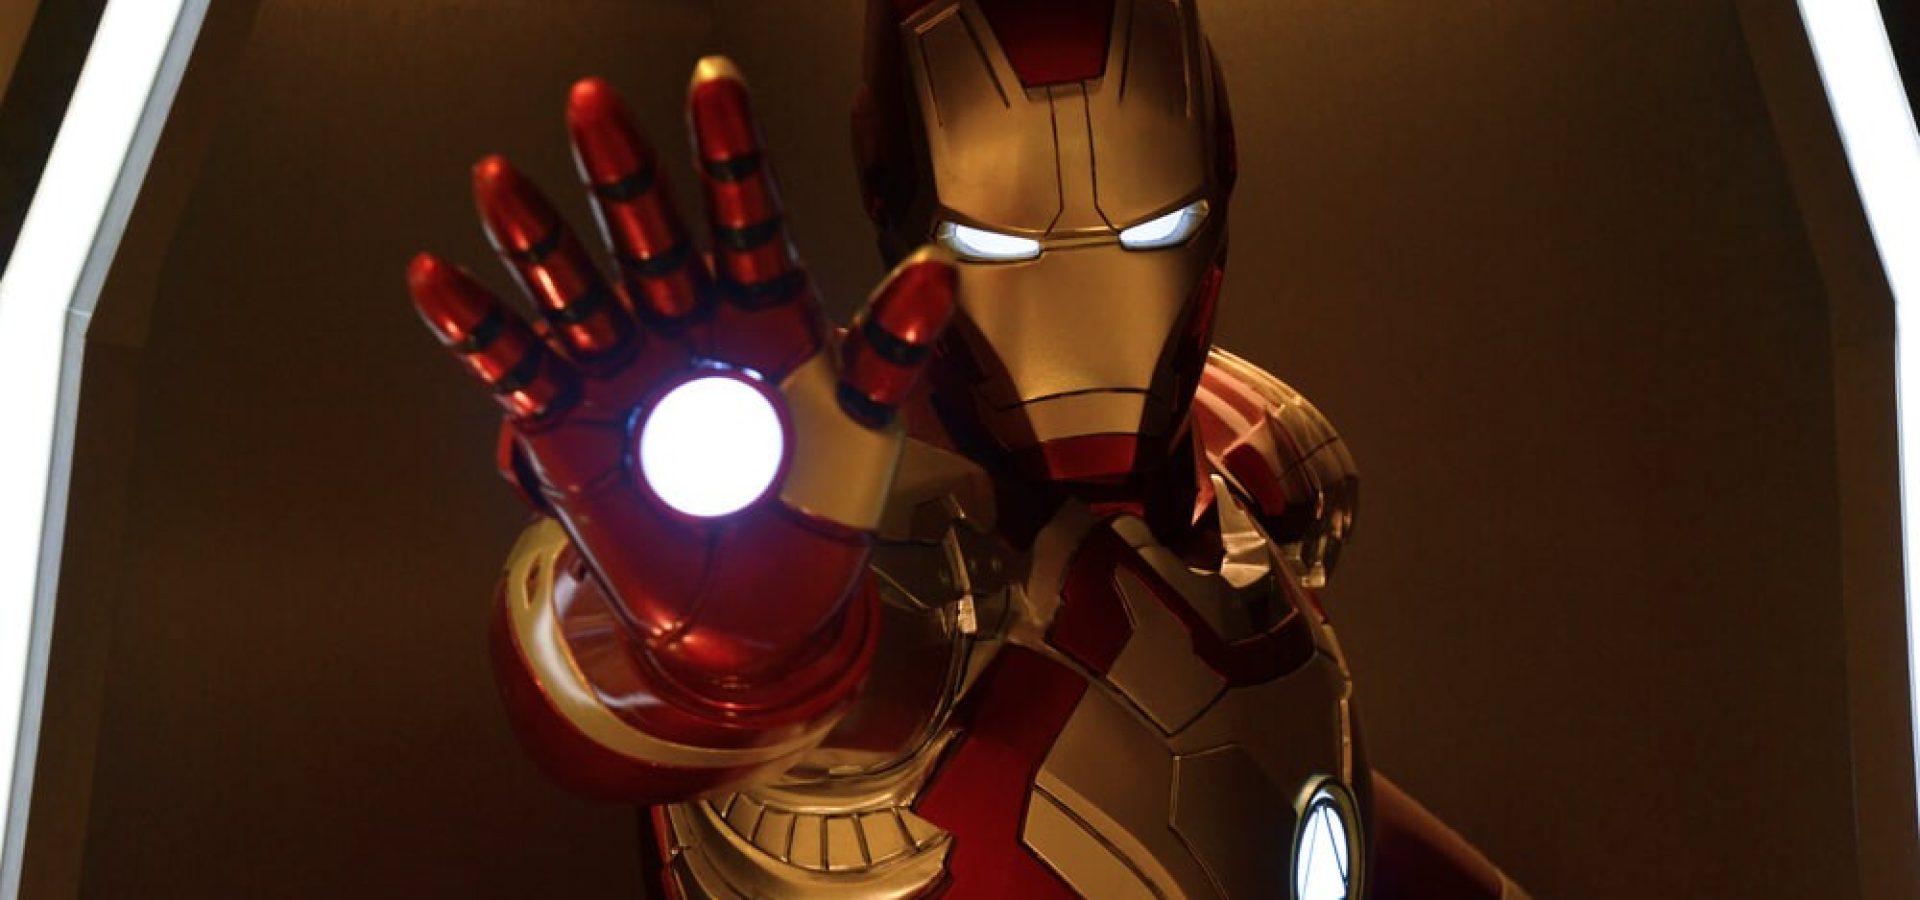 Iron Man – The fictional Iron Man’s suit with his palm-mounted laser pointing at the camera.